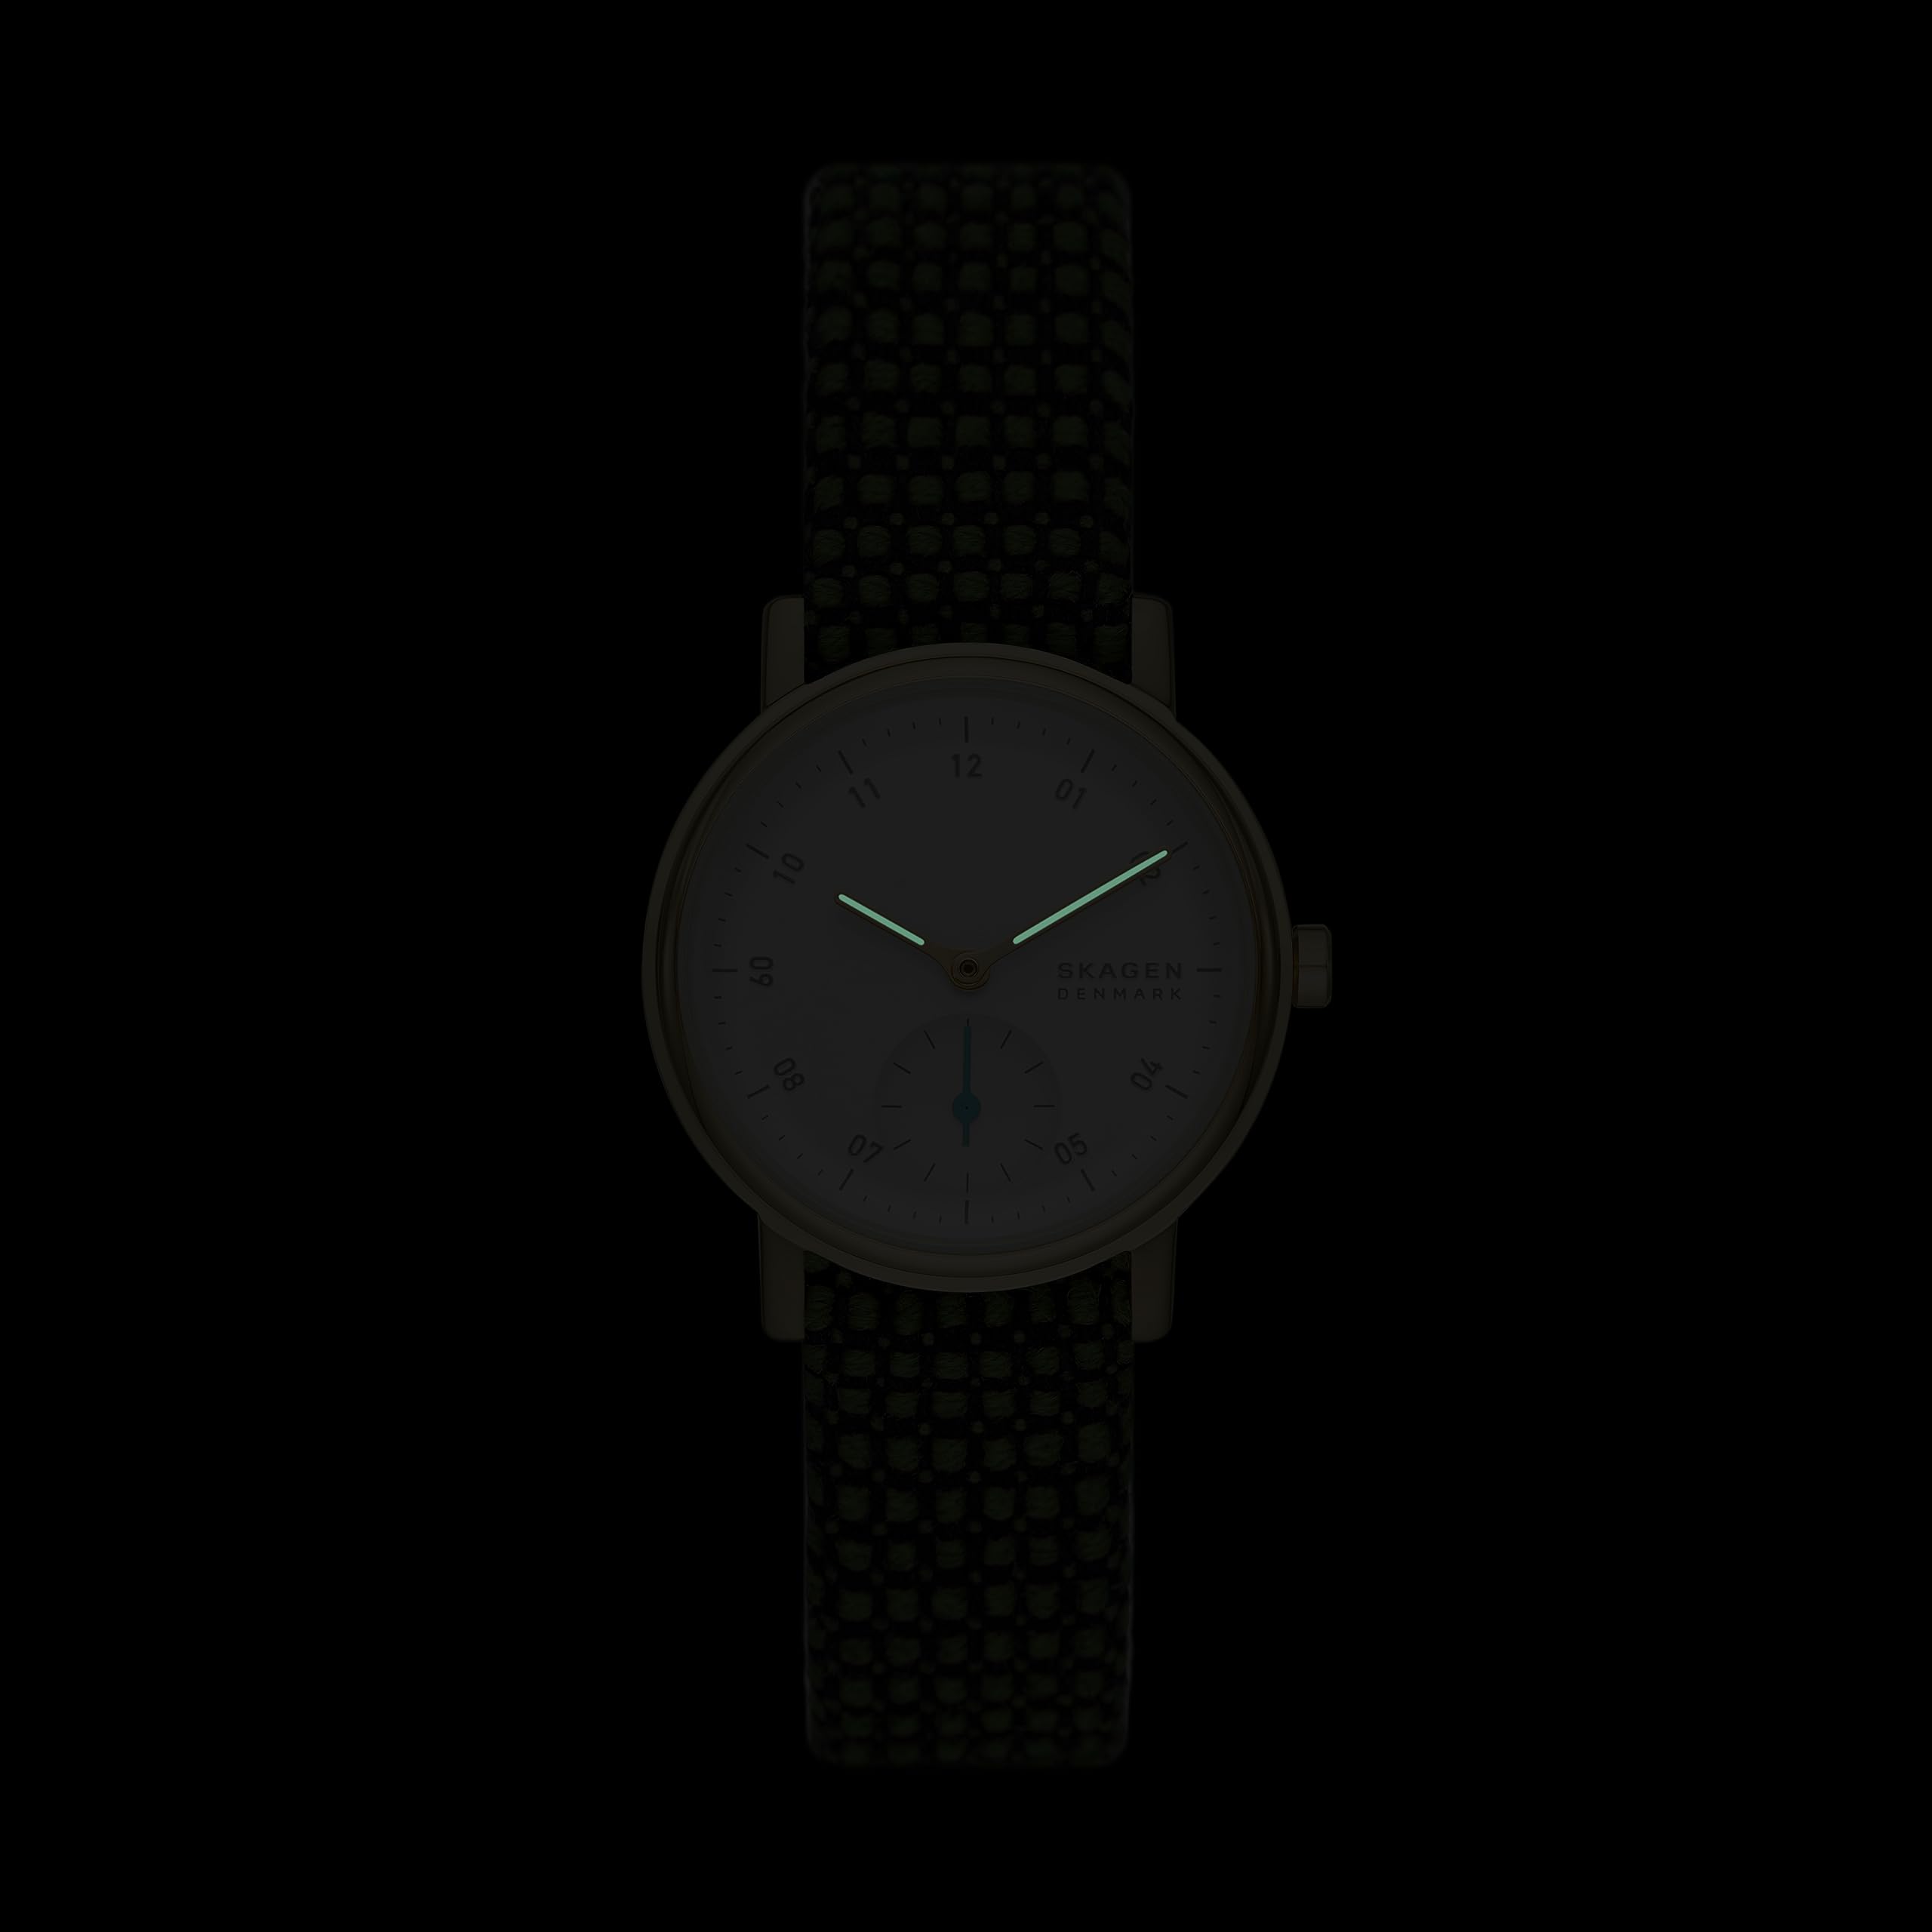 Skagen Women's Kuppel Lille Two-Hand Sub-Second Watch with Steel Mesh or Leather Band